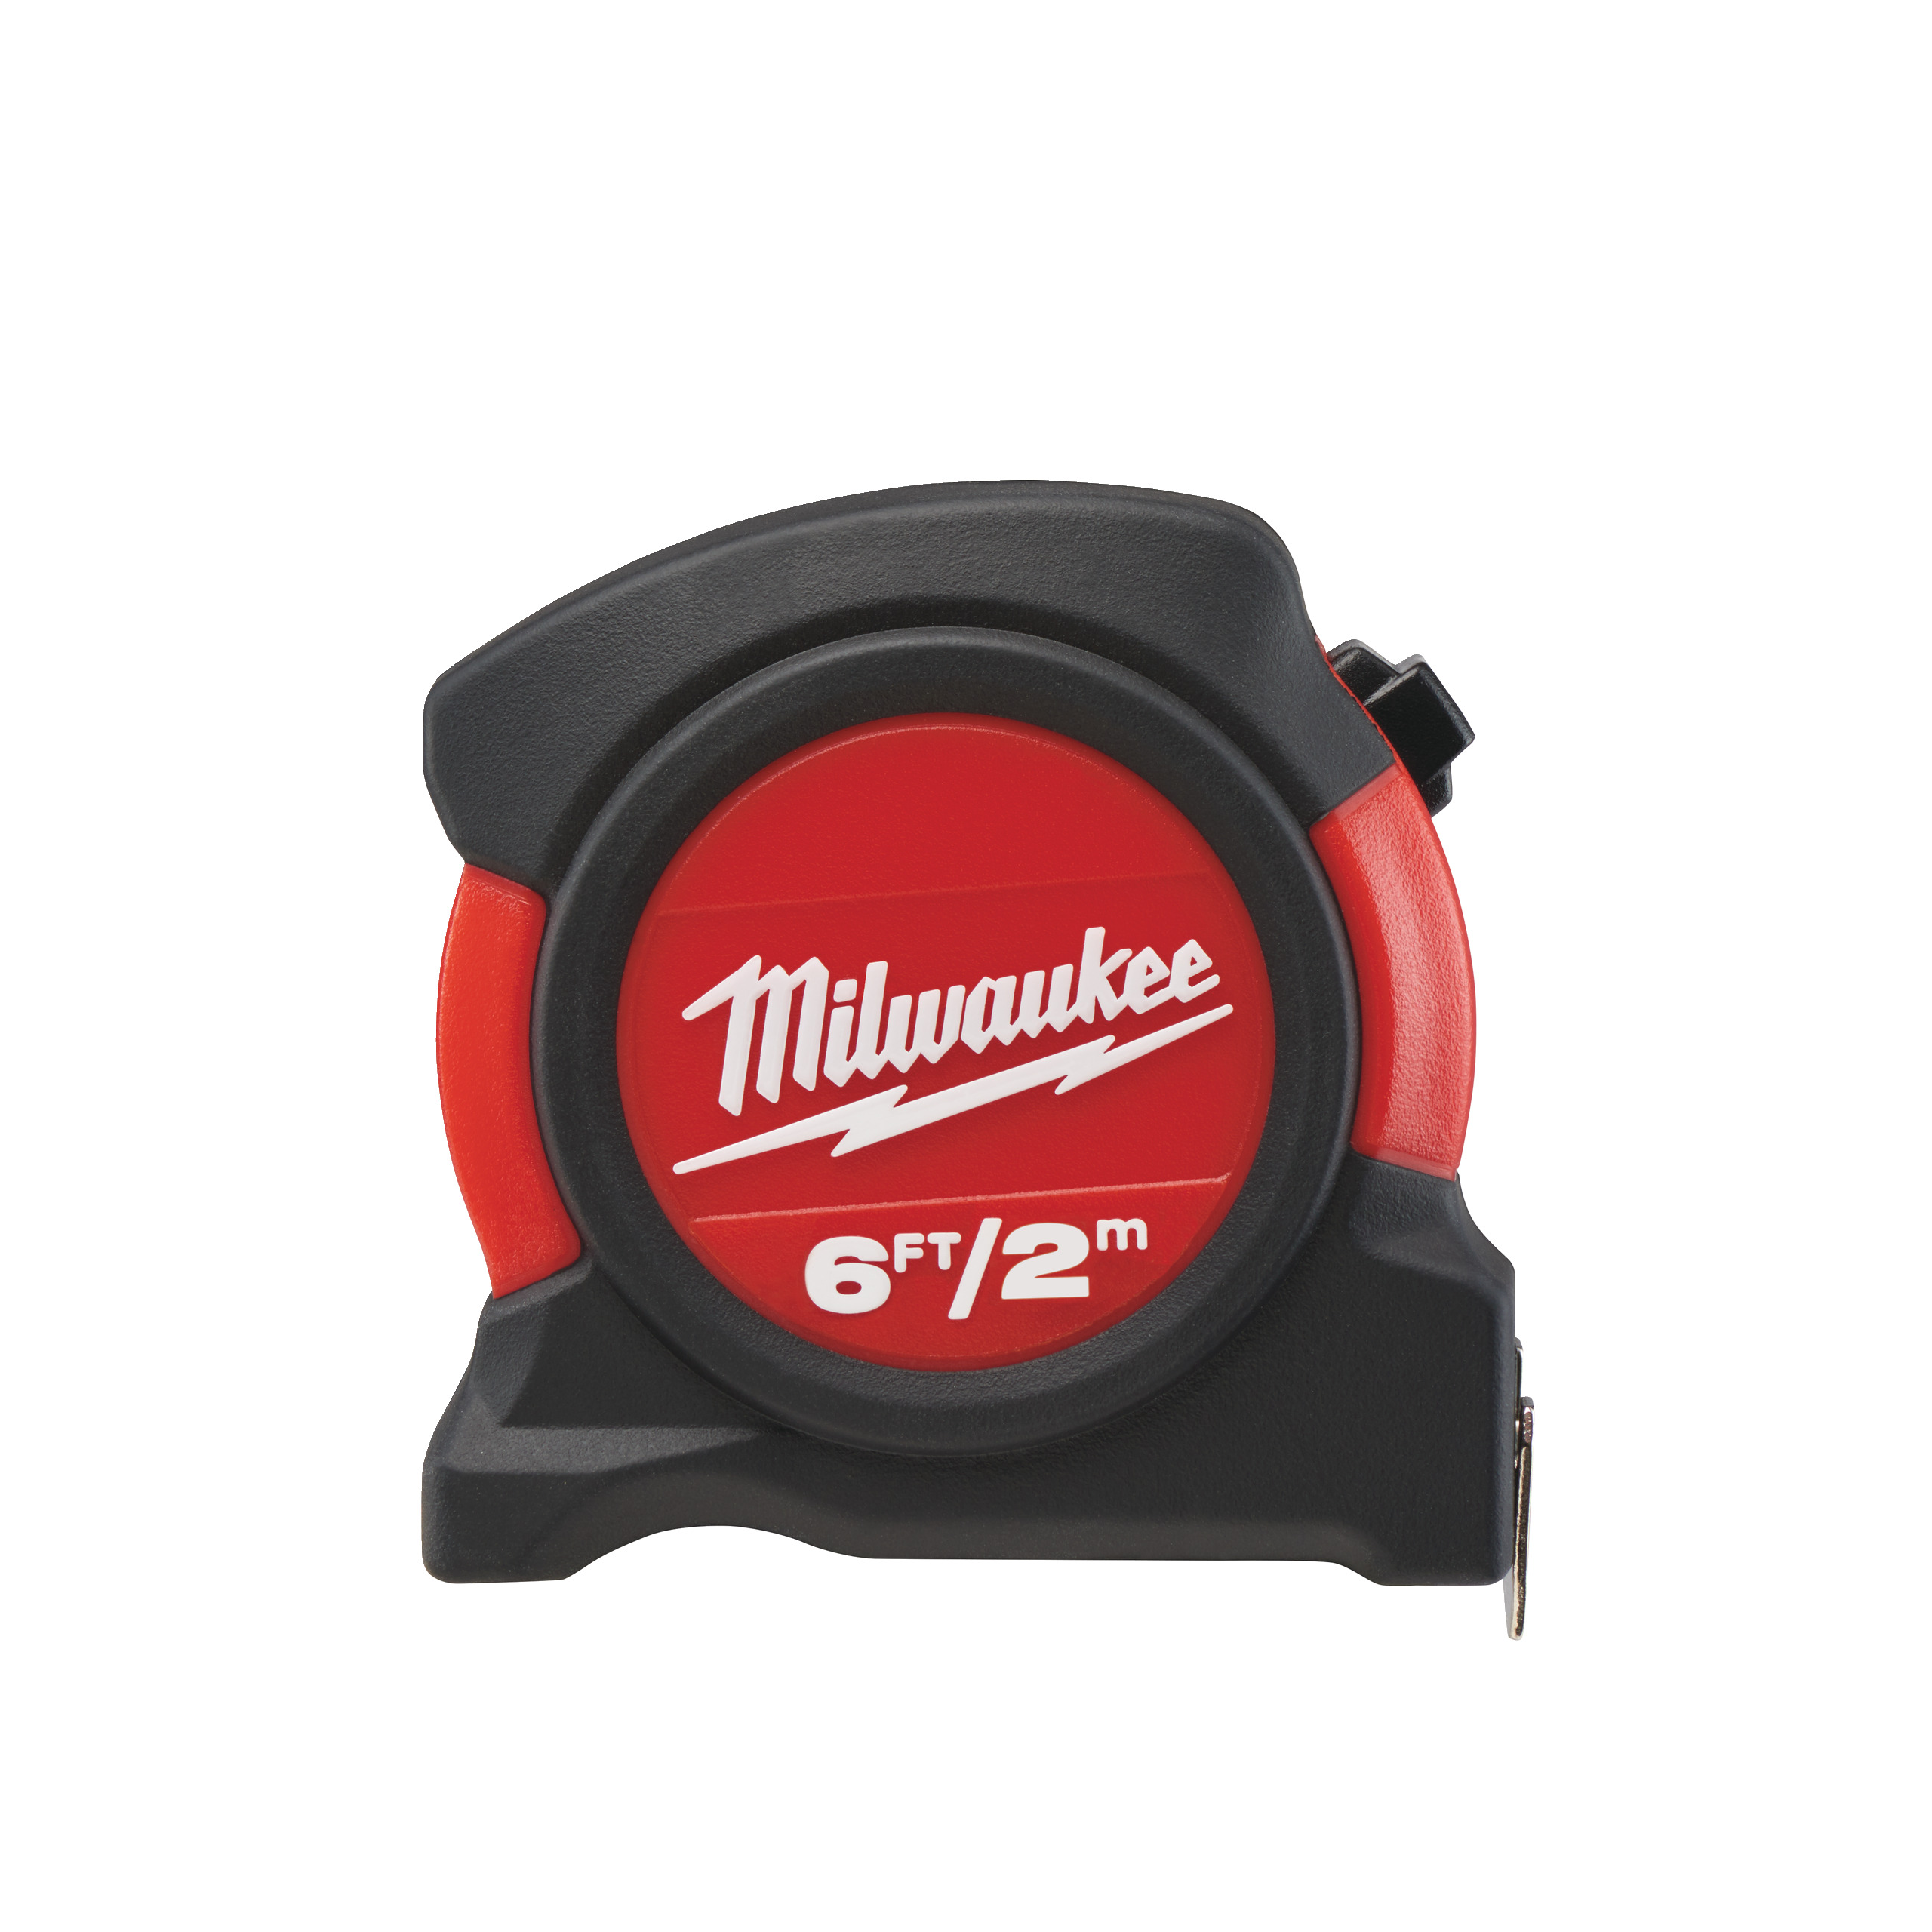 Milwaukee Tape measure NON magnetic metric / imperial 2 m / 6 ft 48225502